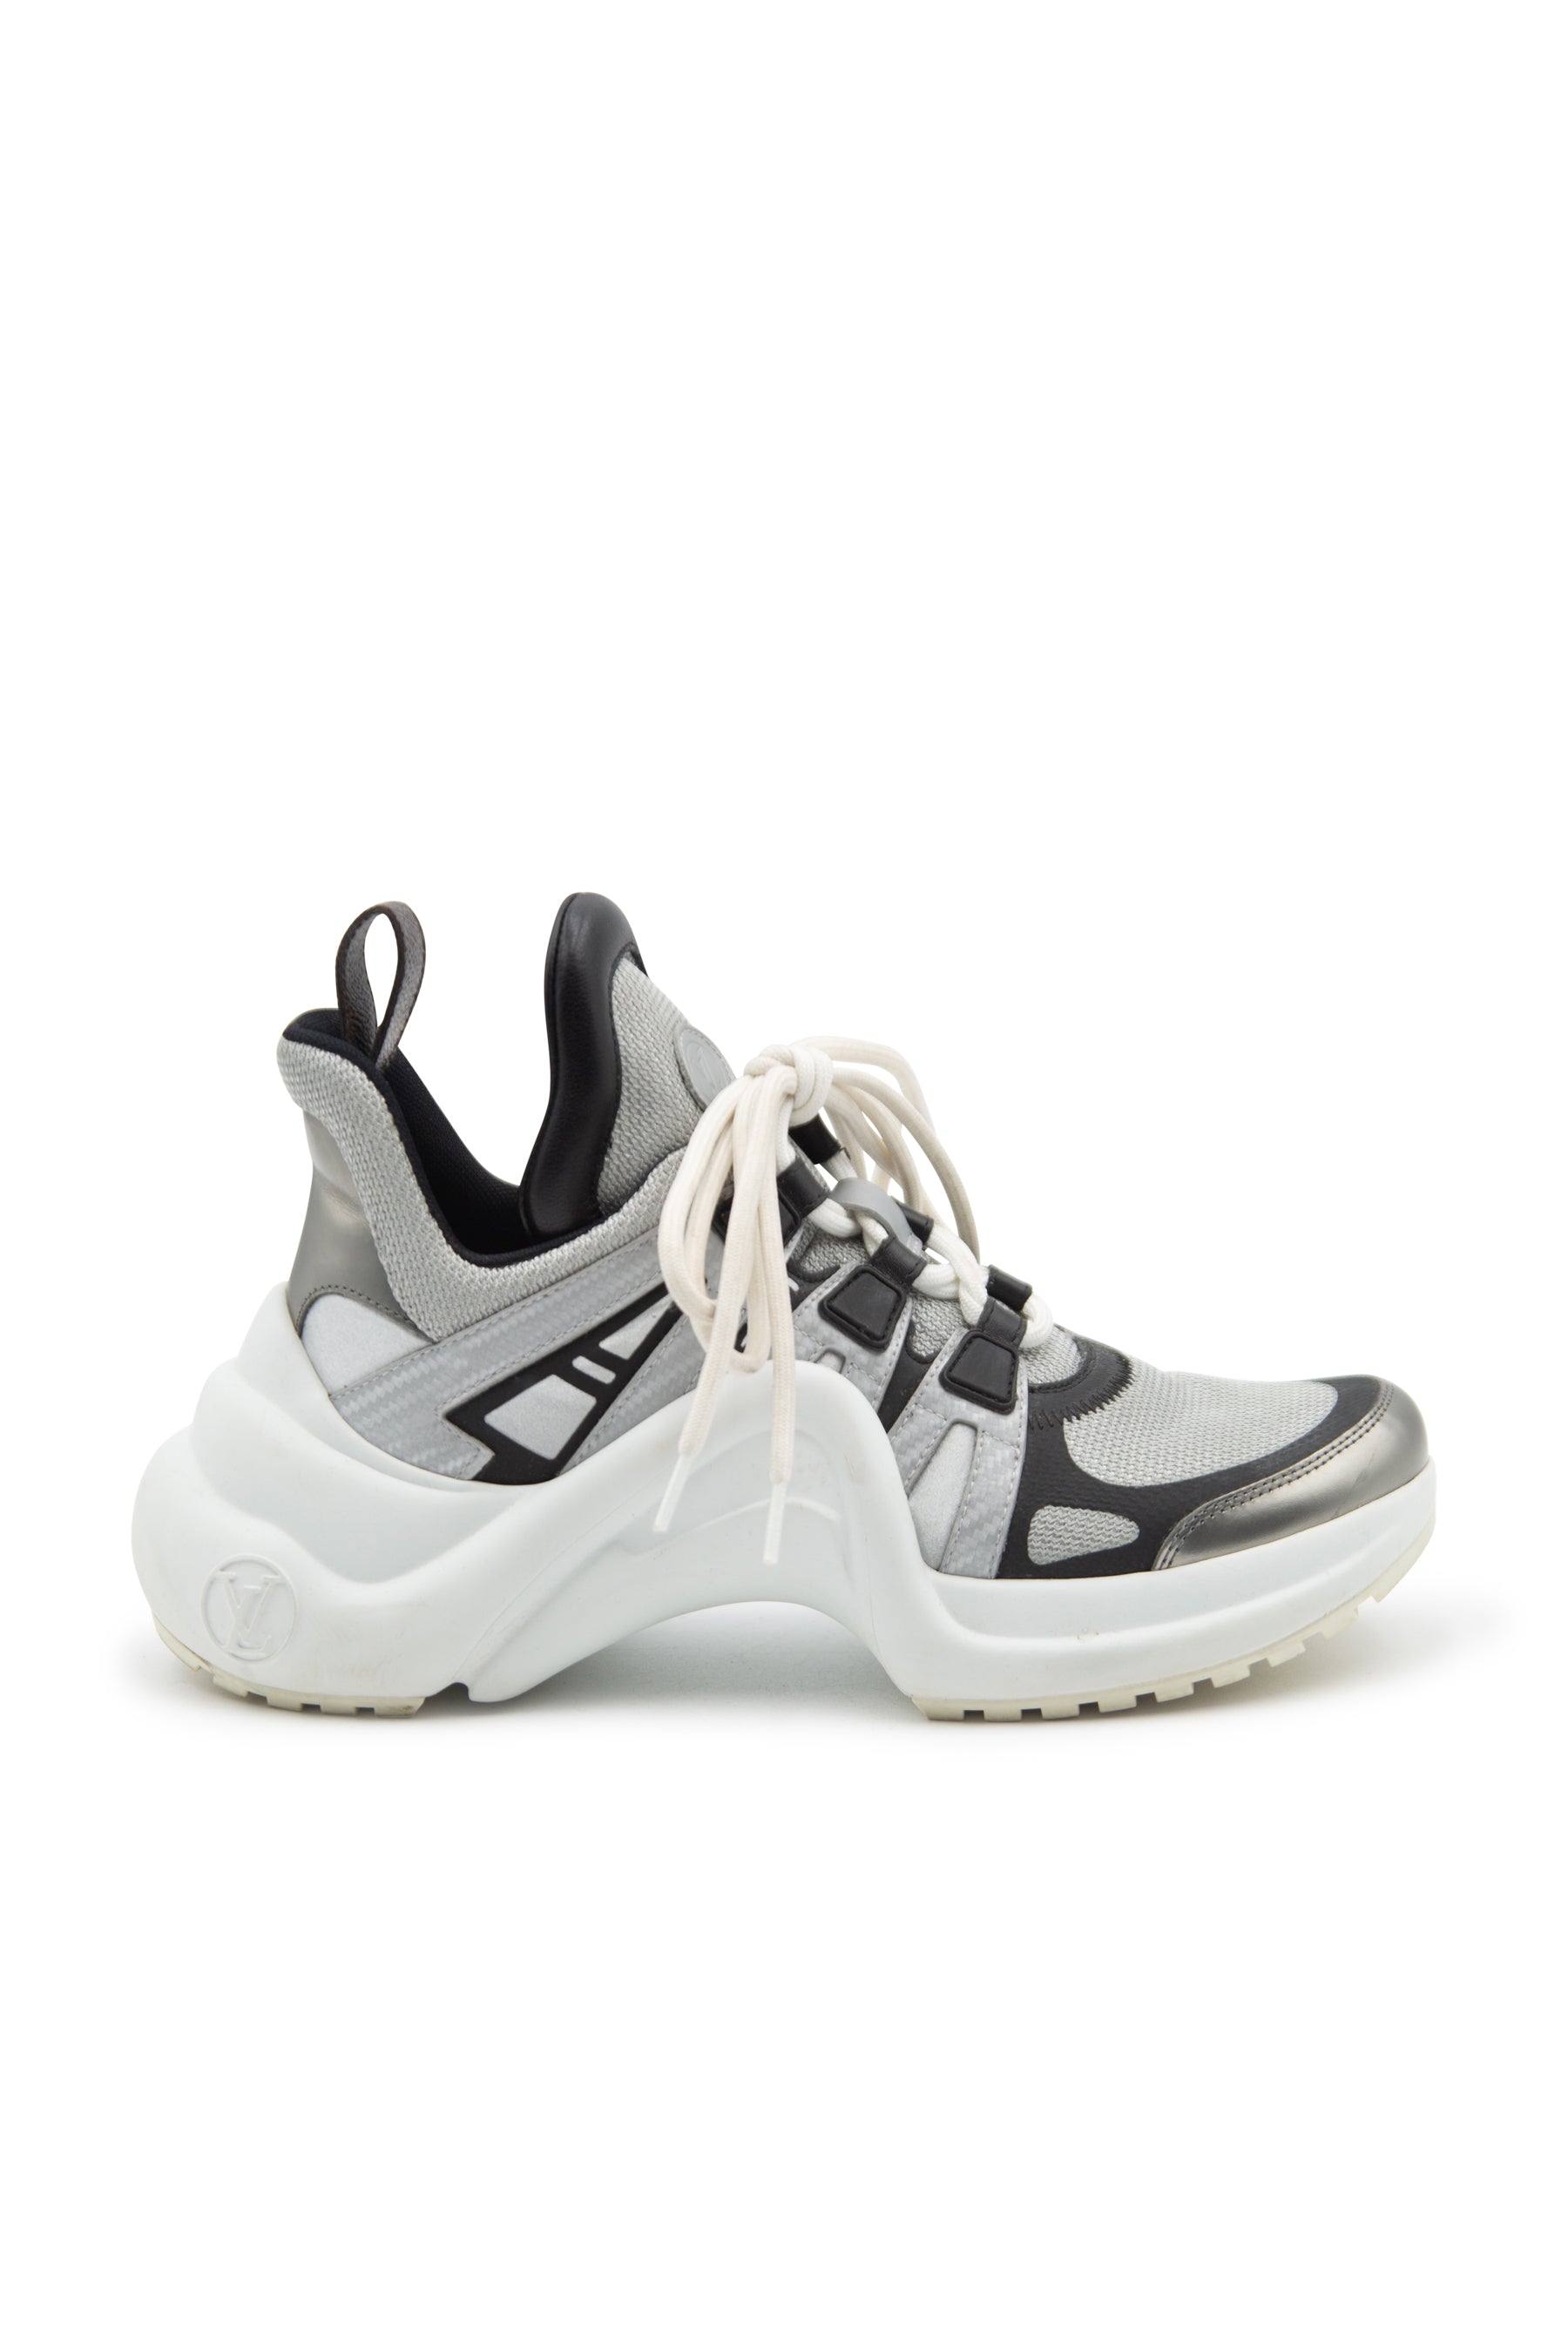 Louis Vuitton Archlight Chunky Sneakers It 37.5 | 7.5